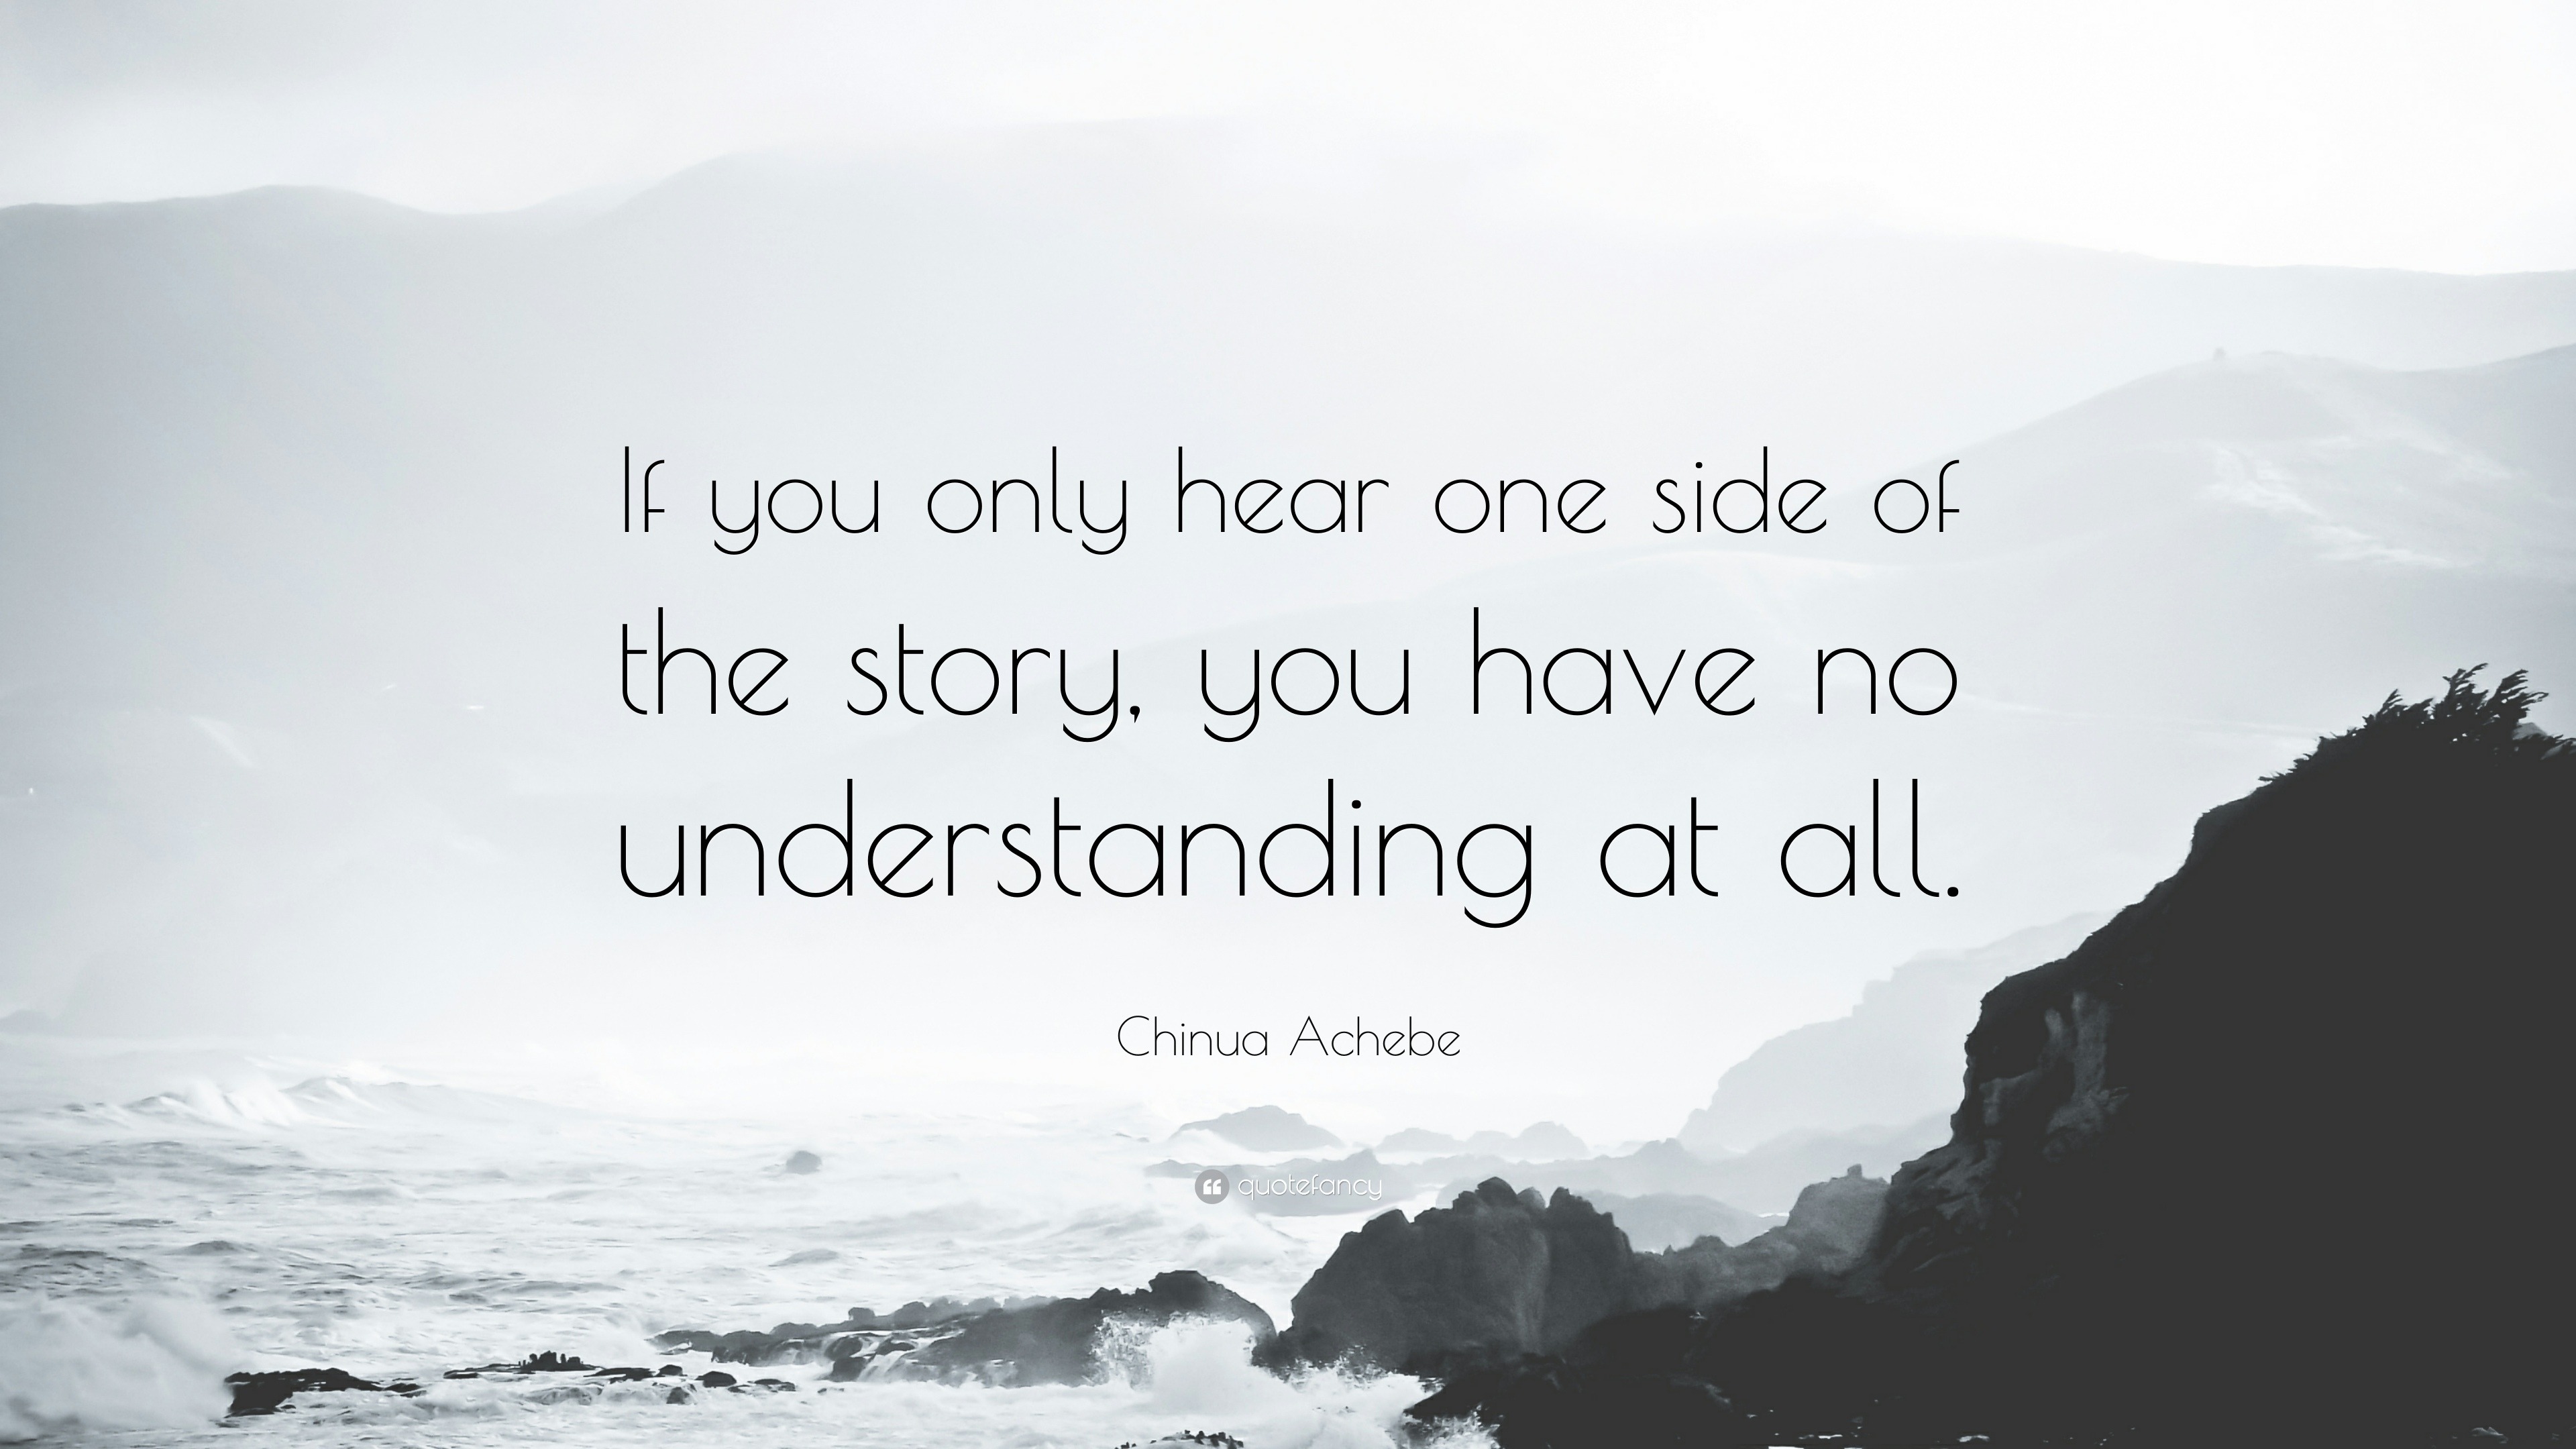 Chinua Achebe Quote: “If you only hear one side of the story, you have no  understanding